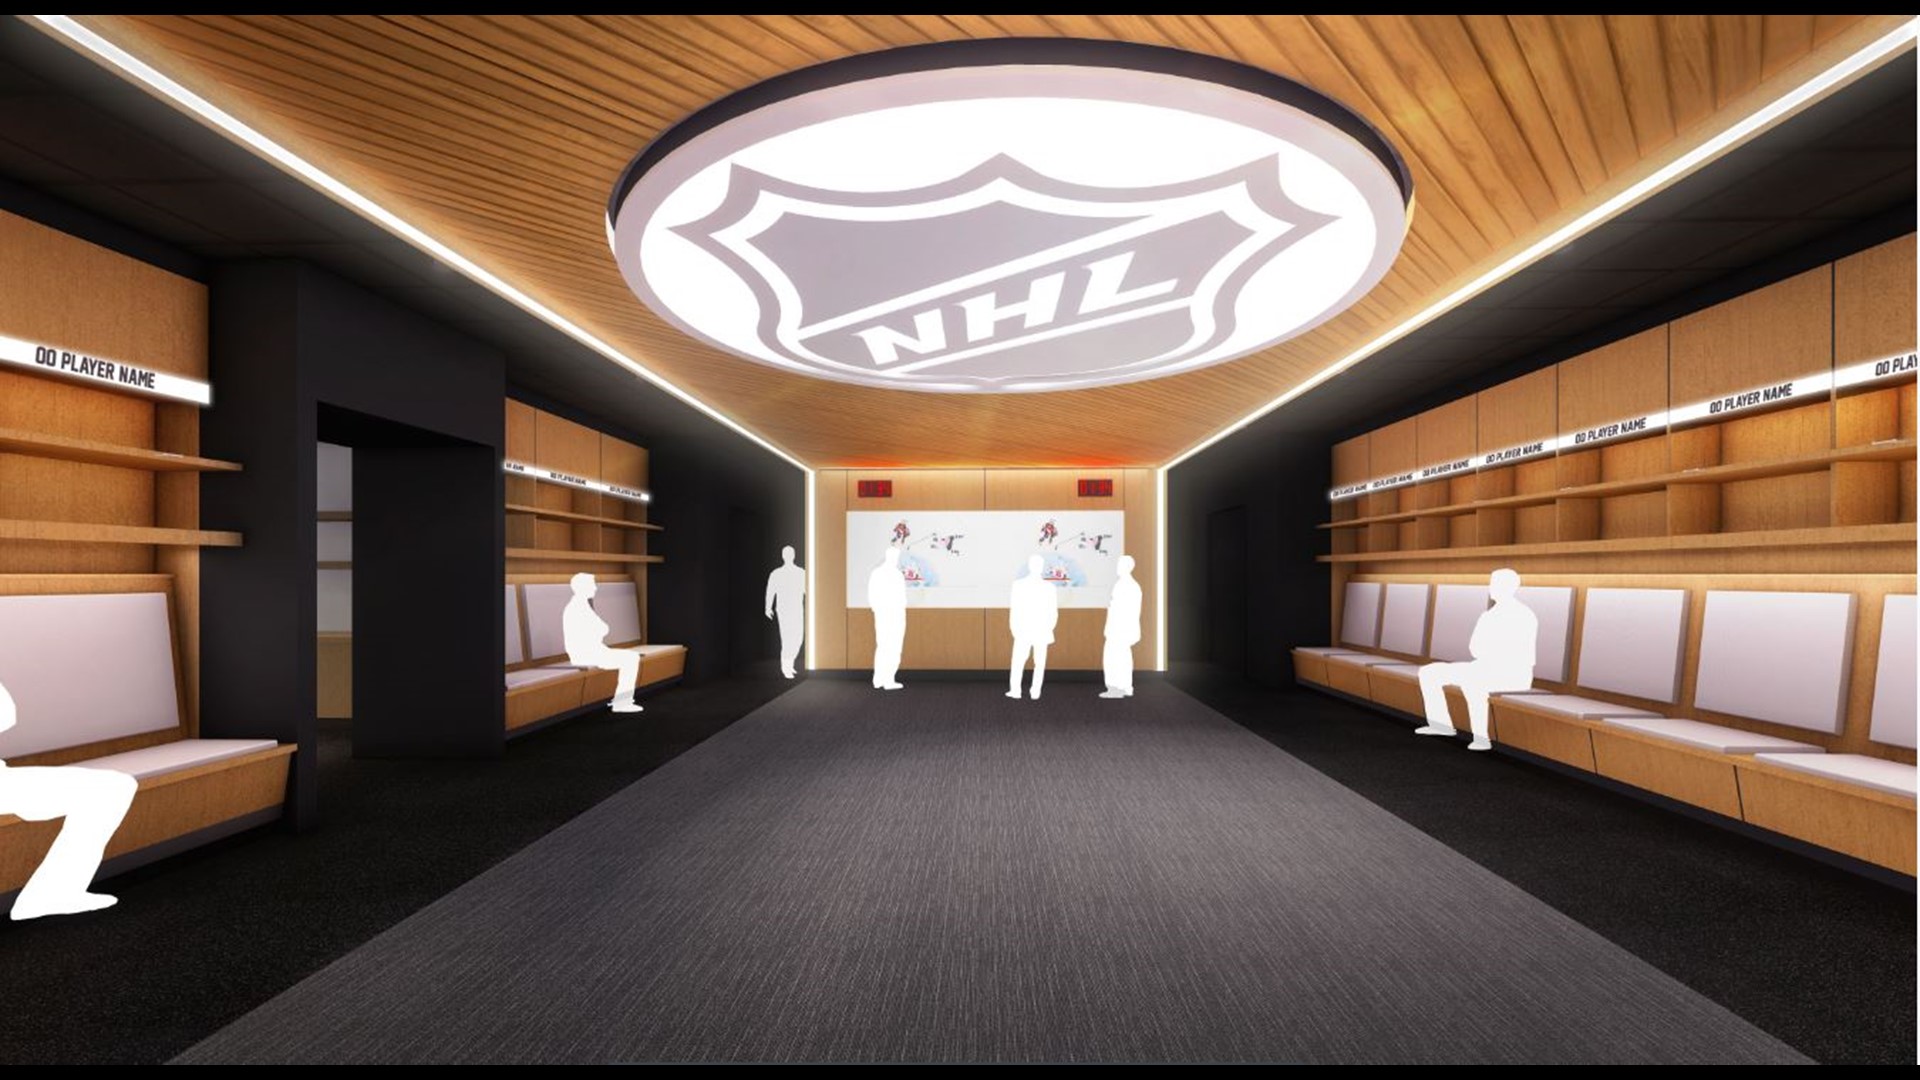 Generator Studios released a video of what the renovations at Northgate Mall will look like after NHL Seattle’s new training facility and headquarters is completed.